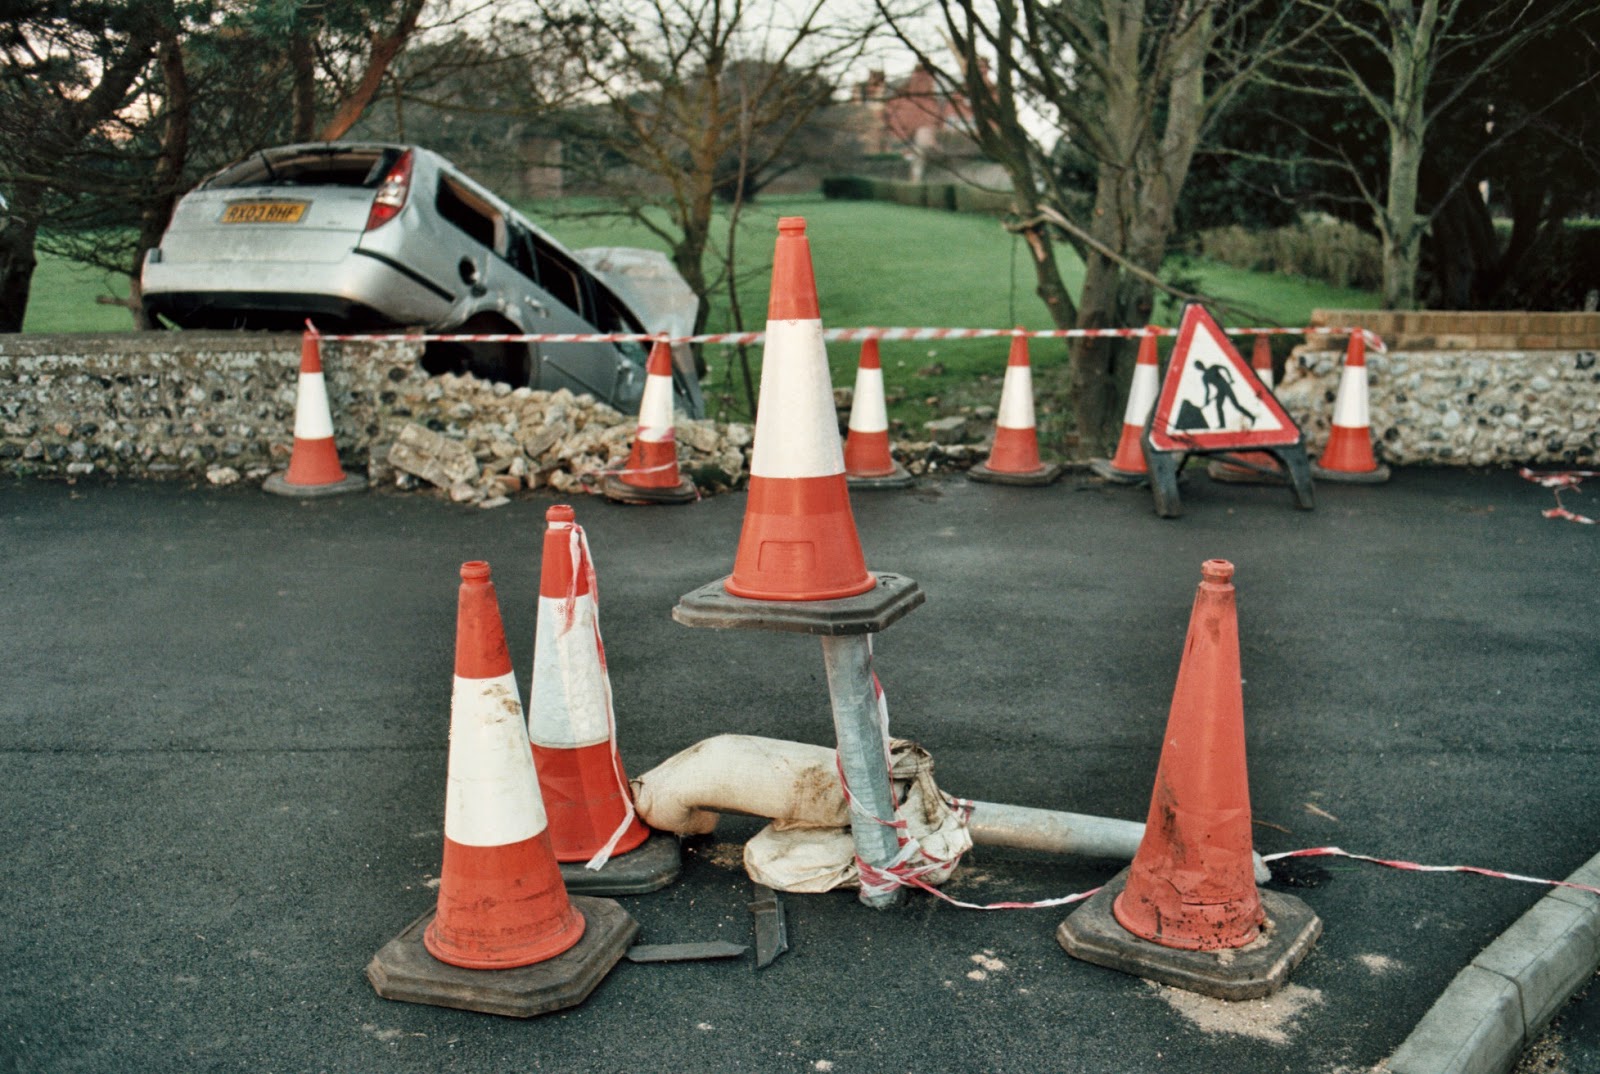 ROAD SAFETY, JOY RIDING, HIGHWAY CODE, ROAD TRAFFIC ACCIDENT, MEN AT WORK, TRAFFIC CONES, INCIDENT TAPE, DRUNKEN DRIVING, STONE WALLS, VEHICLE RECOVERY, EMERGENCY SERVICES,  RAMSGATE, KENT  © VAC 100 DAYS 4 MILLION CONVERSATIONS